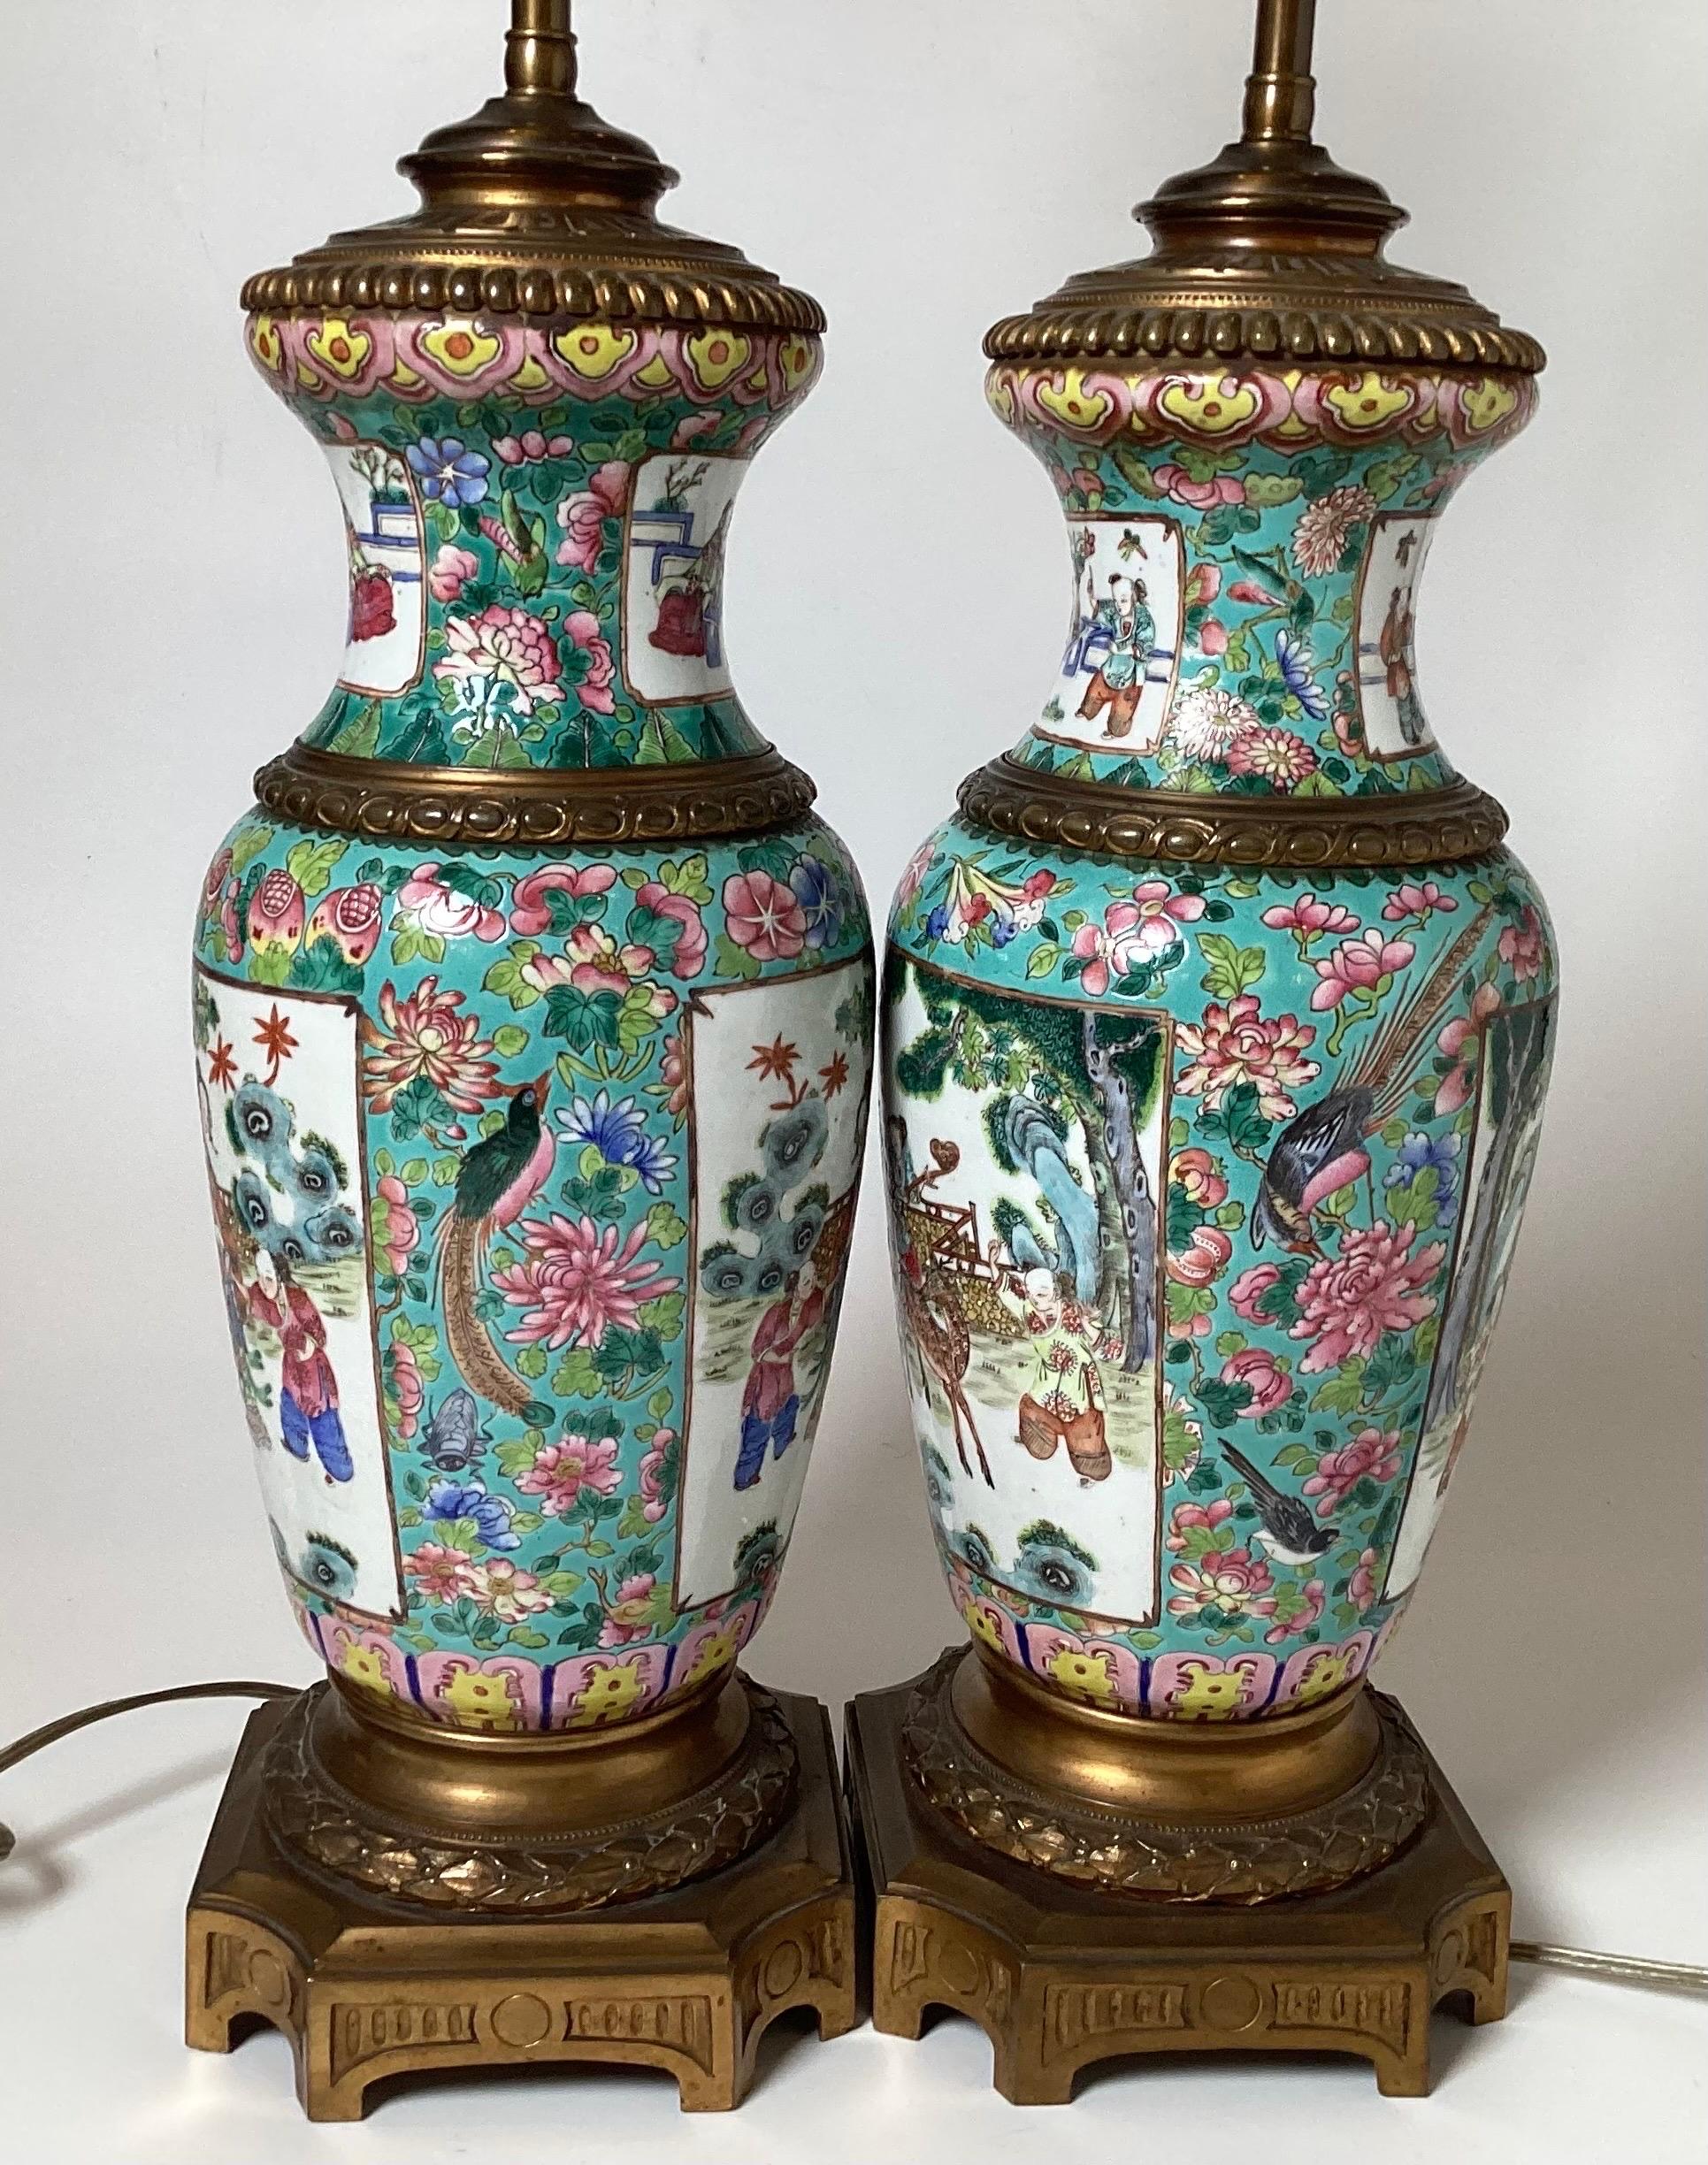 A remarkable pair of early 19th century hand painted Rose Mandarin Chinese Export porcelain vases now as lamps. The vases are pre-1850 and lamped in the 1920's with elegant gilt bronze mounts. The porcelain vases are original mirror image to each